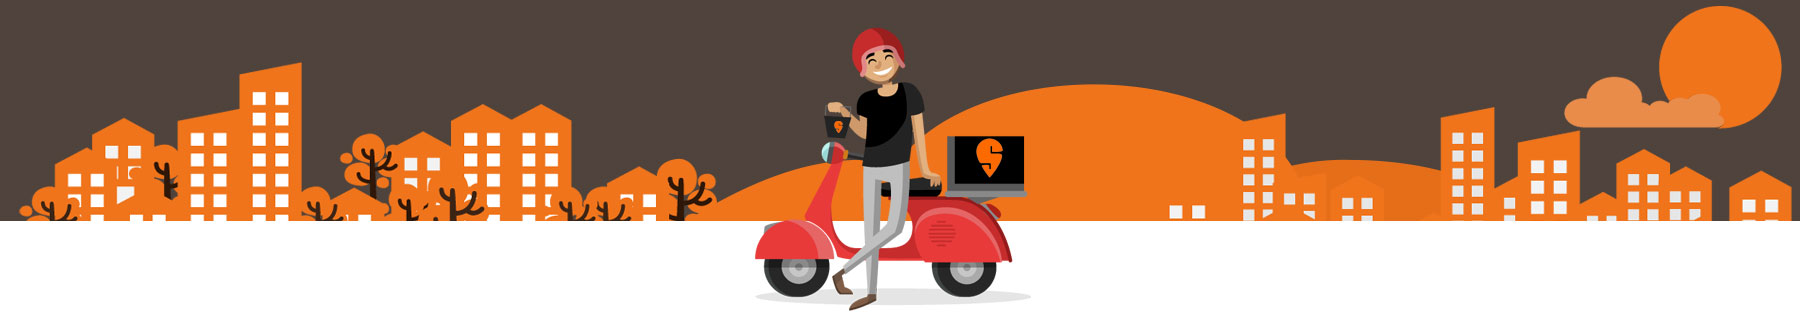 swiggy delivery mobile app ui